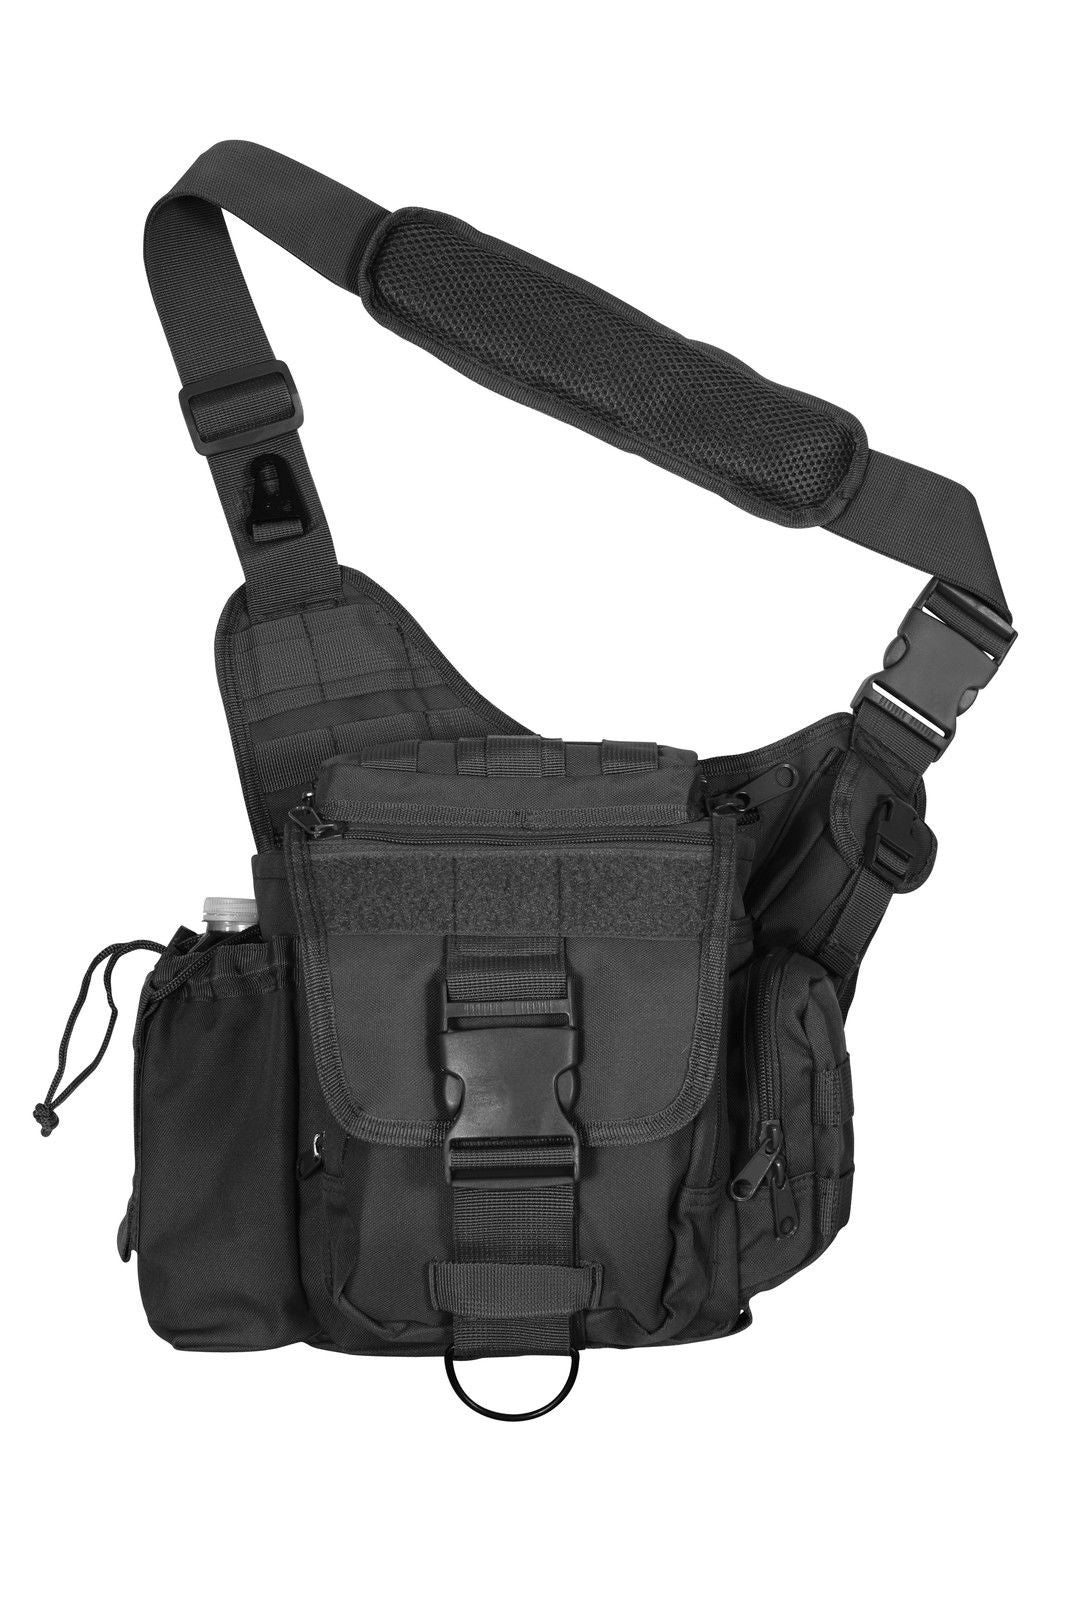 Tactical MOLLE Pouch Small Canvas Messenger Bag Small Sling Bag Crossbody  Pack